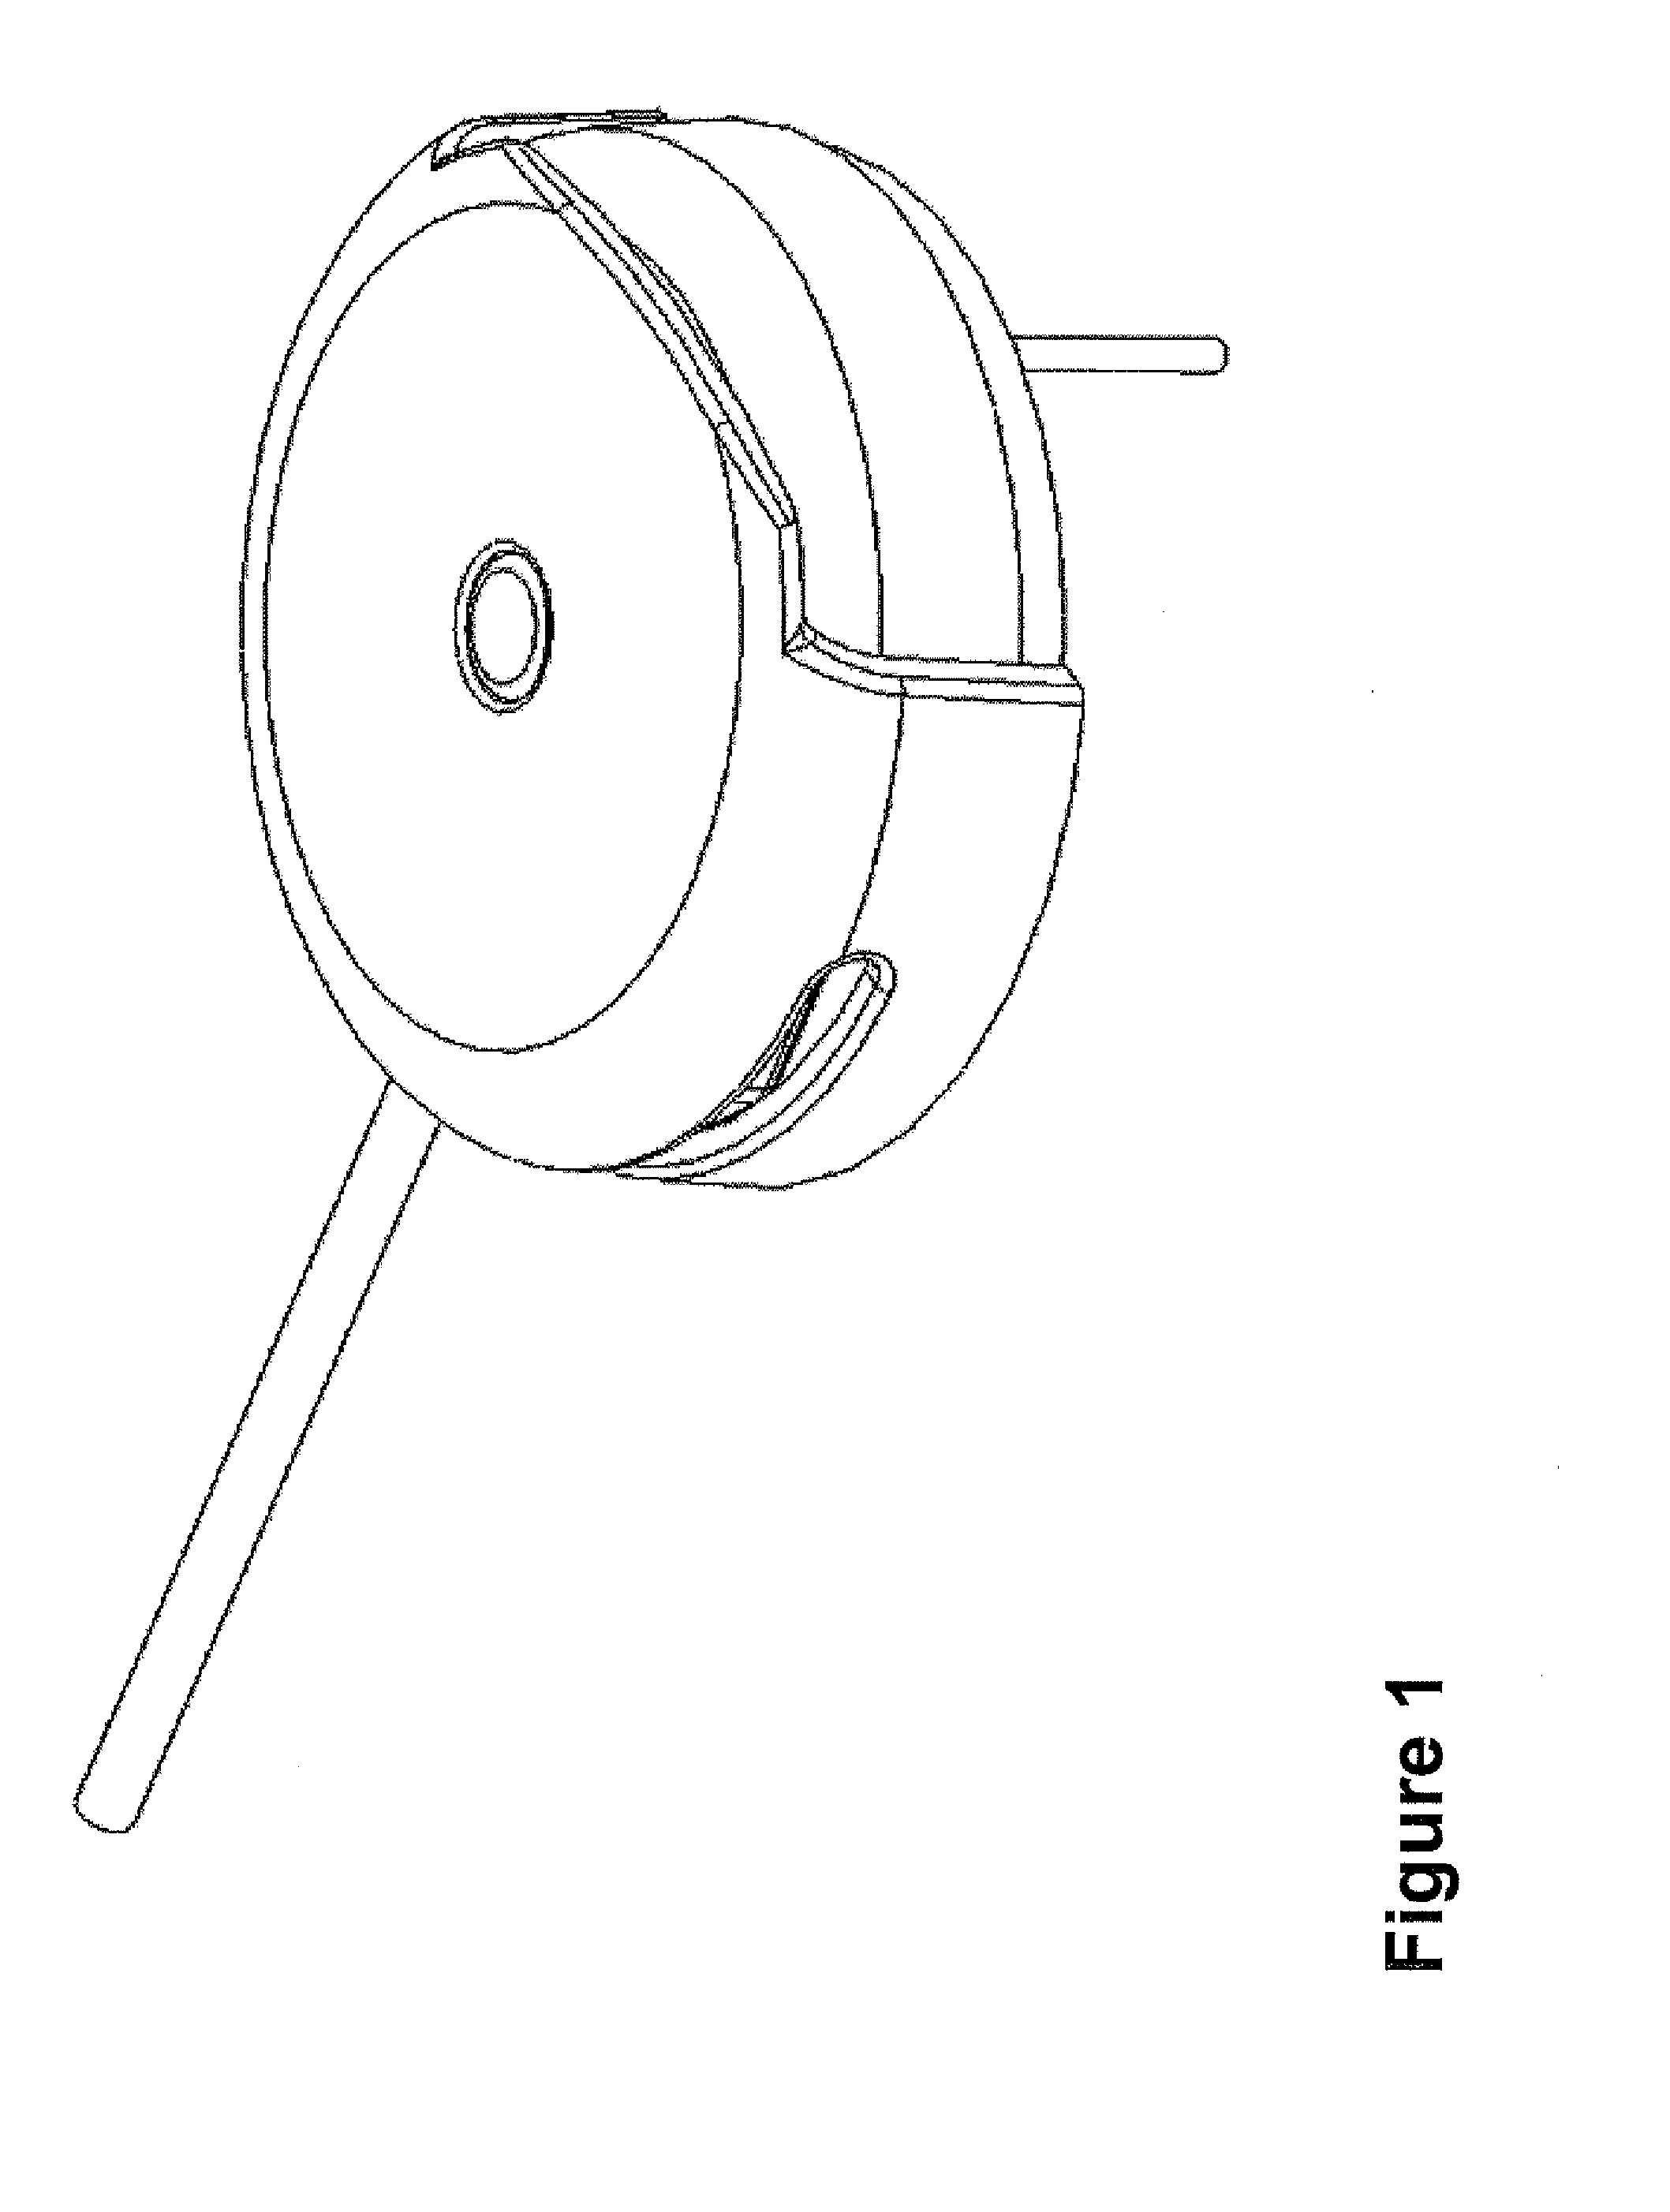 Infusion set self-occlusion mechanism